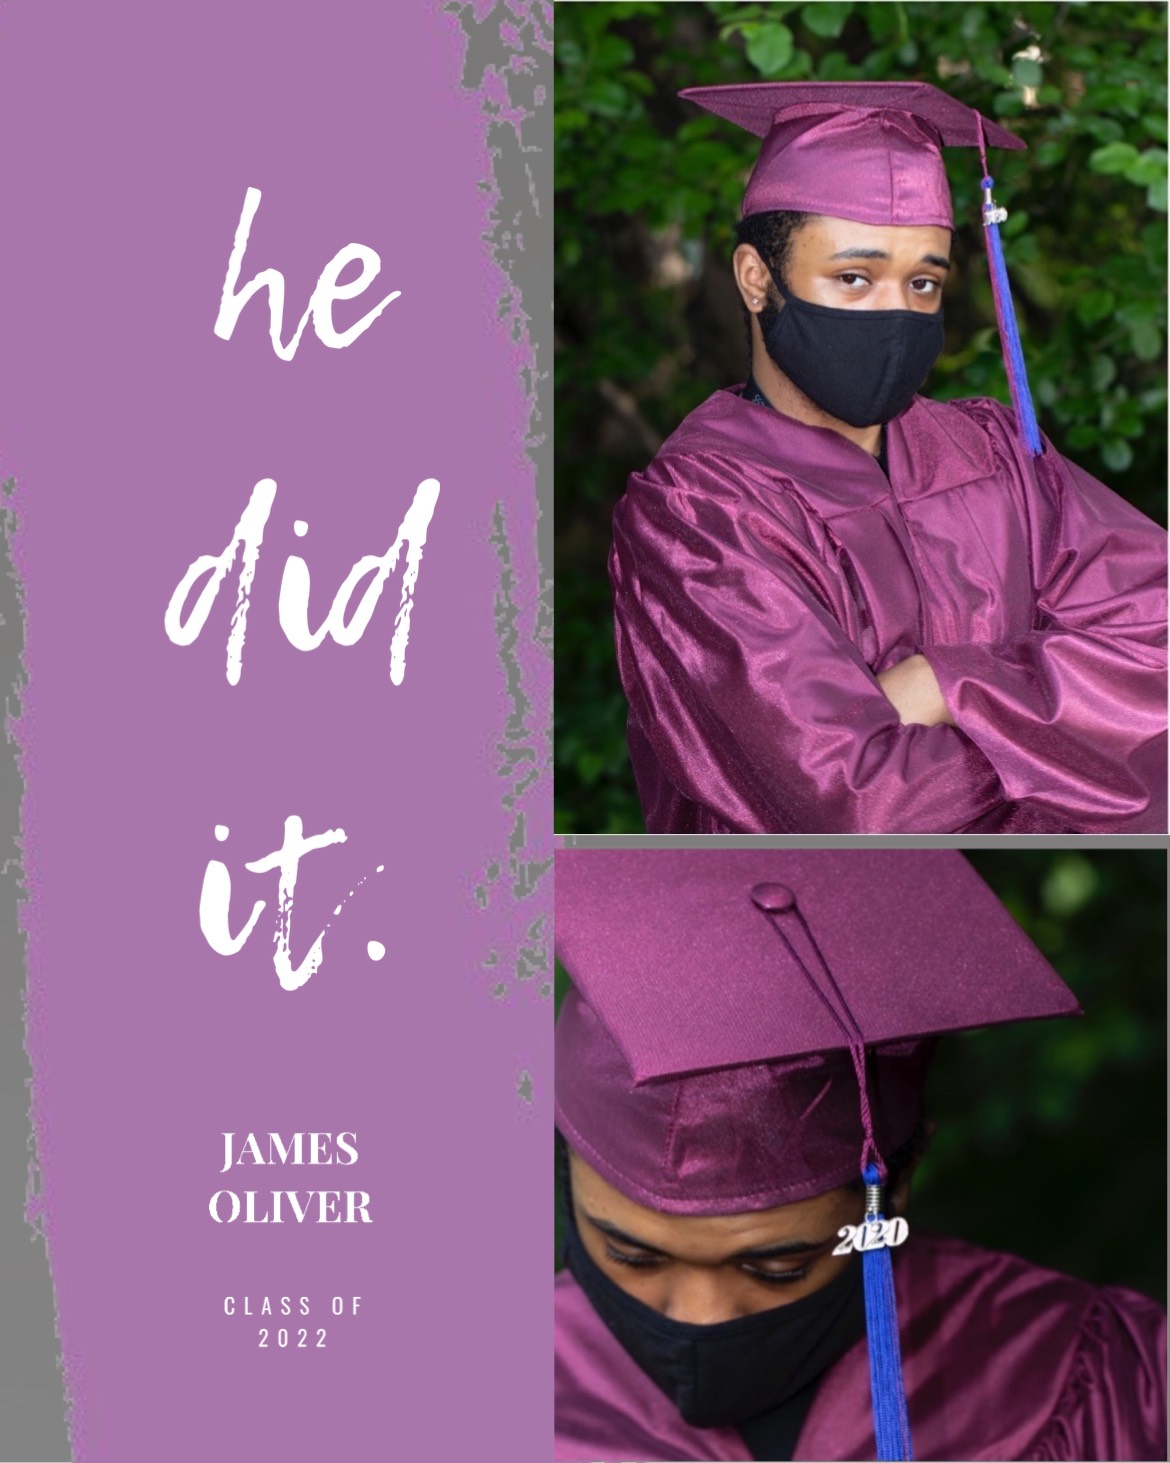 A Collage Of Photos Of A Man Wearing A Graduation Cap And Gown Graduation Template